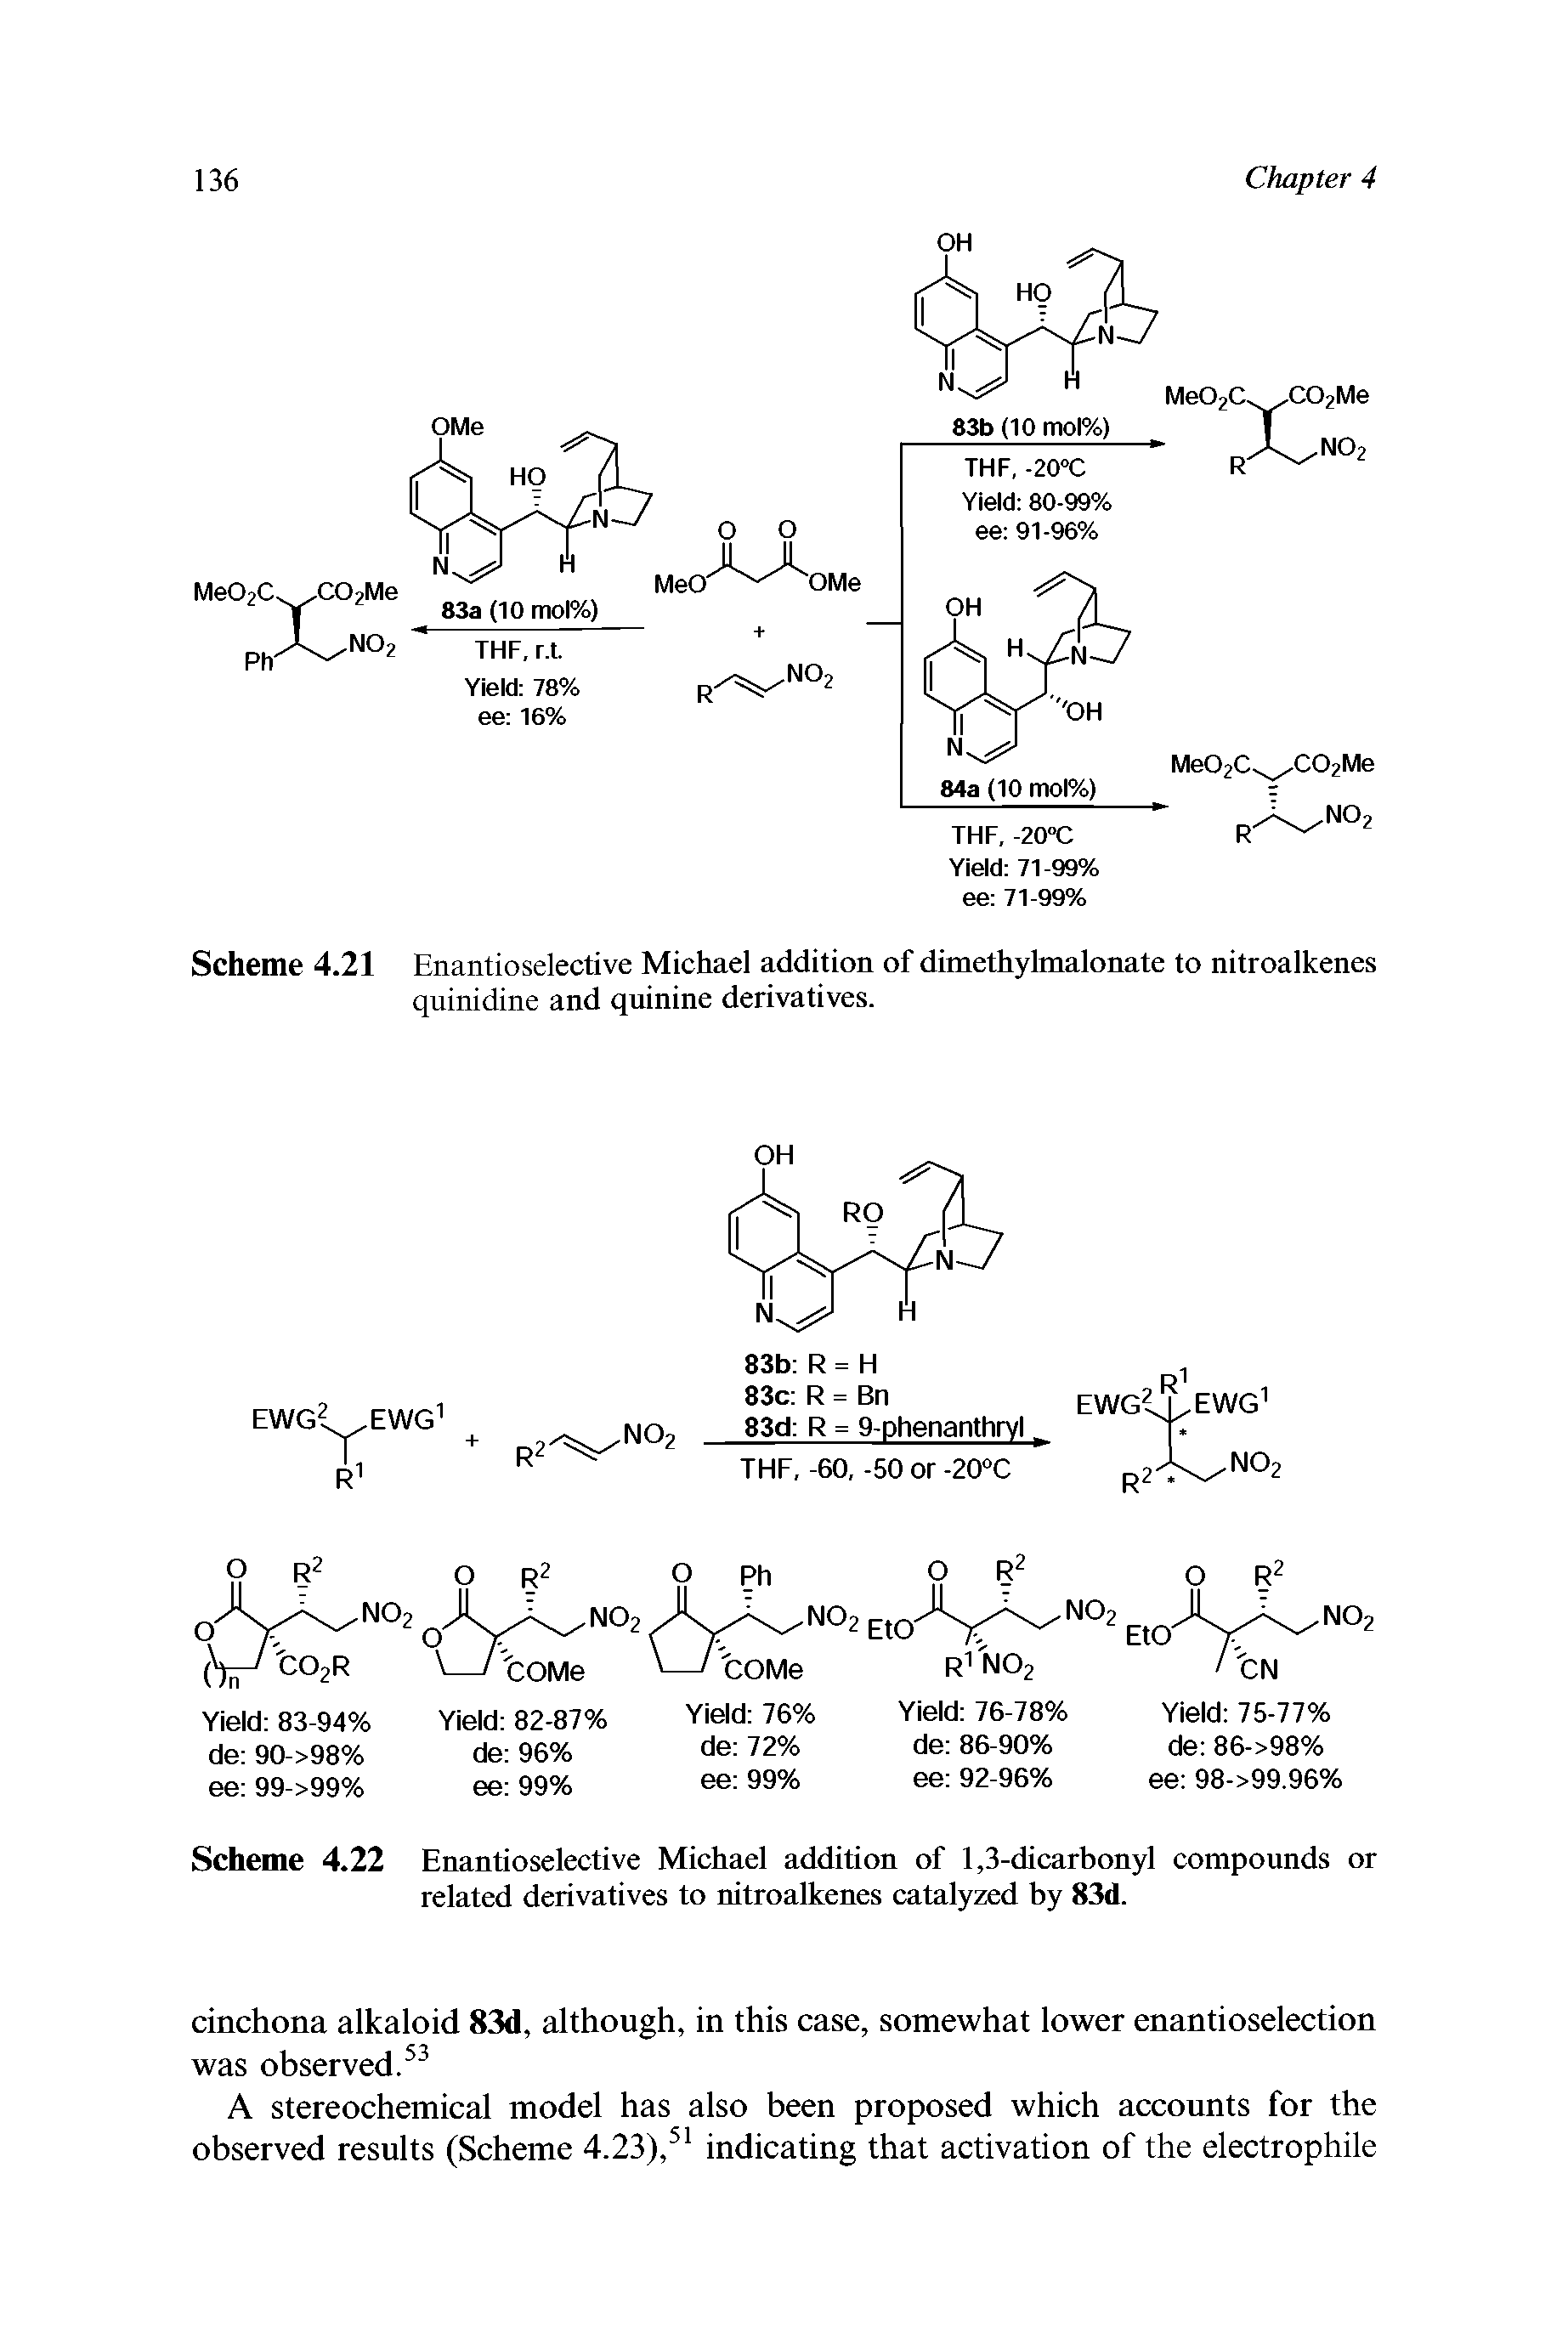 Scheme 4.22 Enantioselective Michael addition of 1,3-dicarbonyl compounds or related derivatives to nitroalkenes catalyzed by 83d.